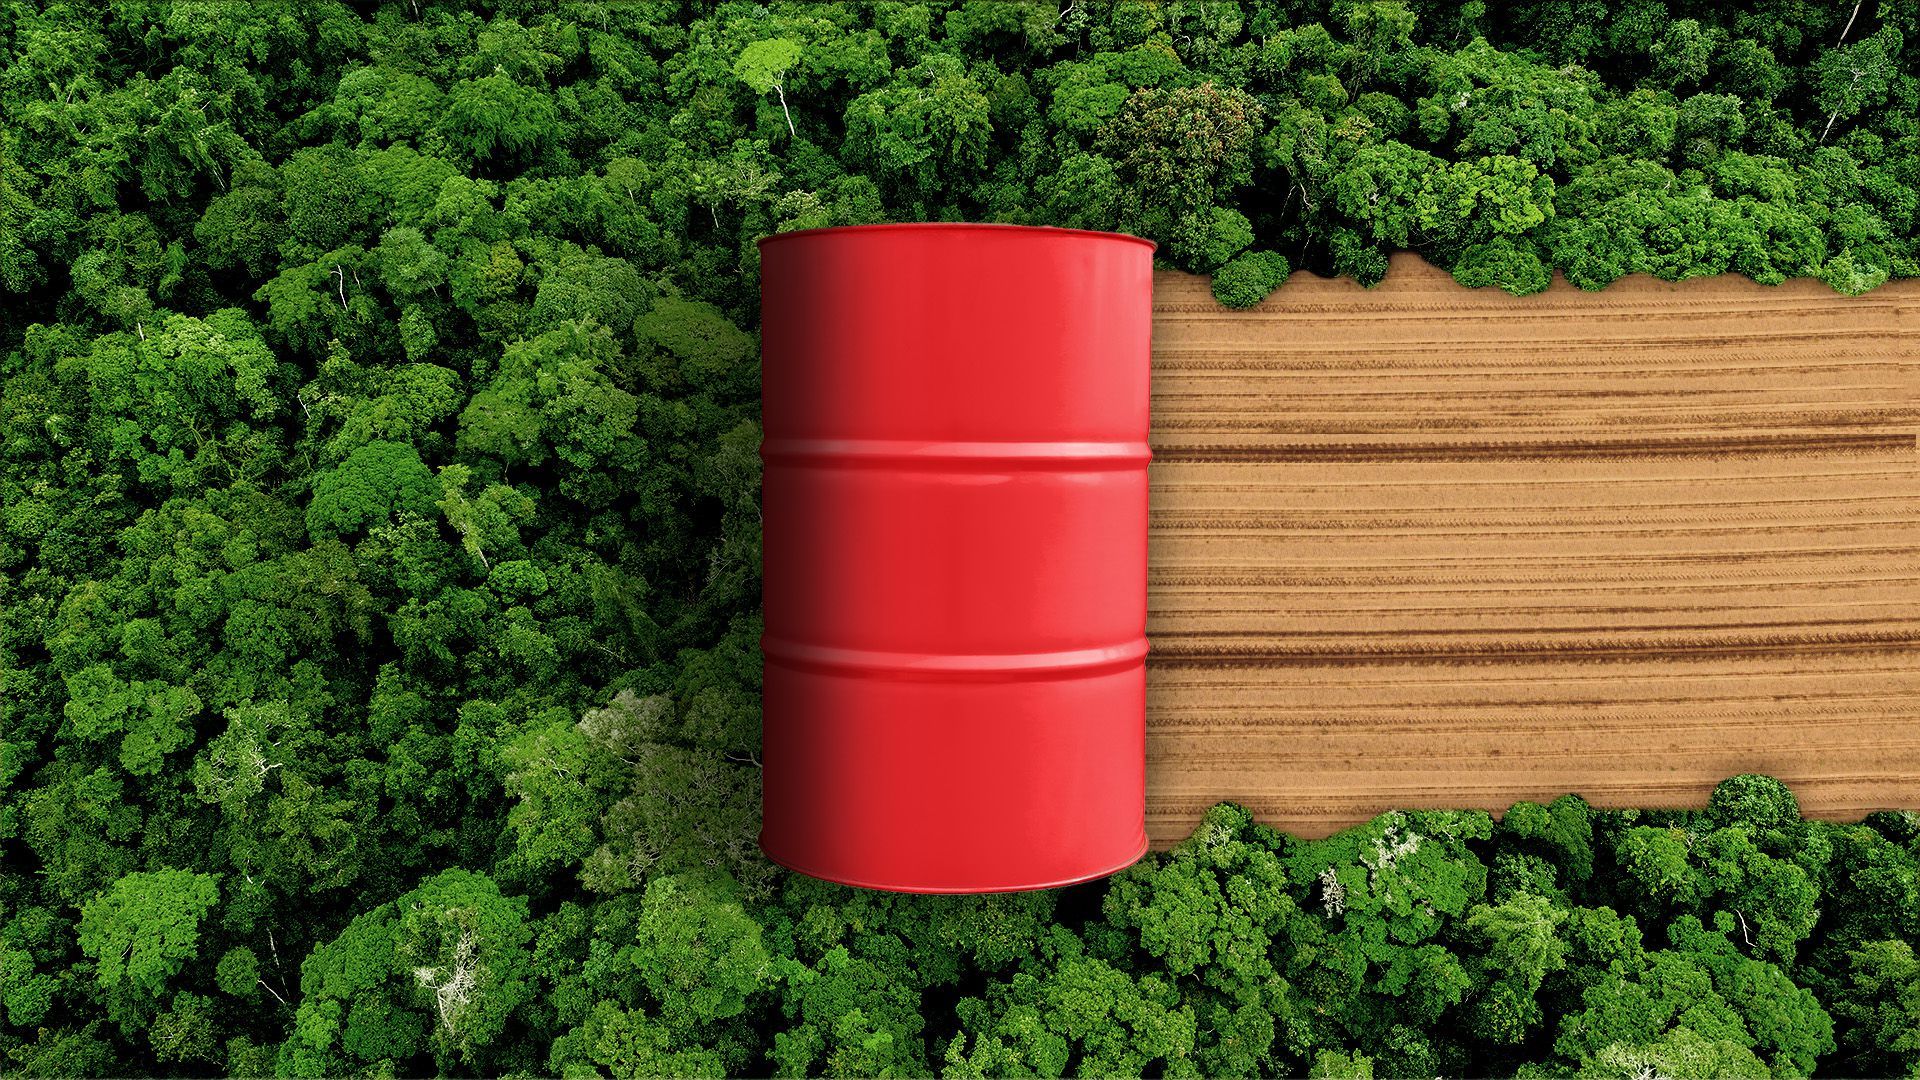 Illustration of an oil barrel rolling through a rainforest and leaving a dirt path behind it